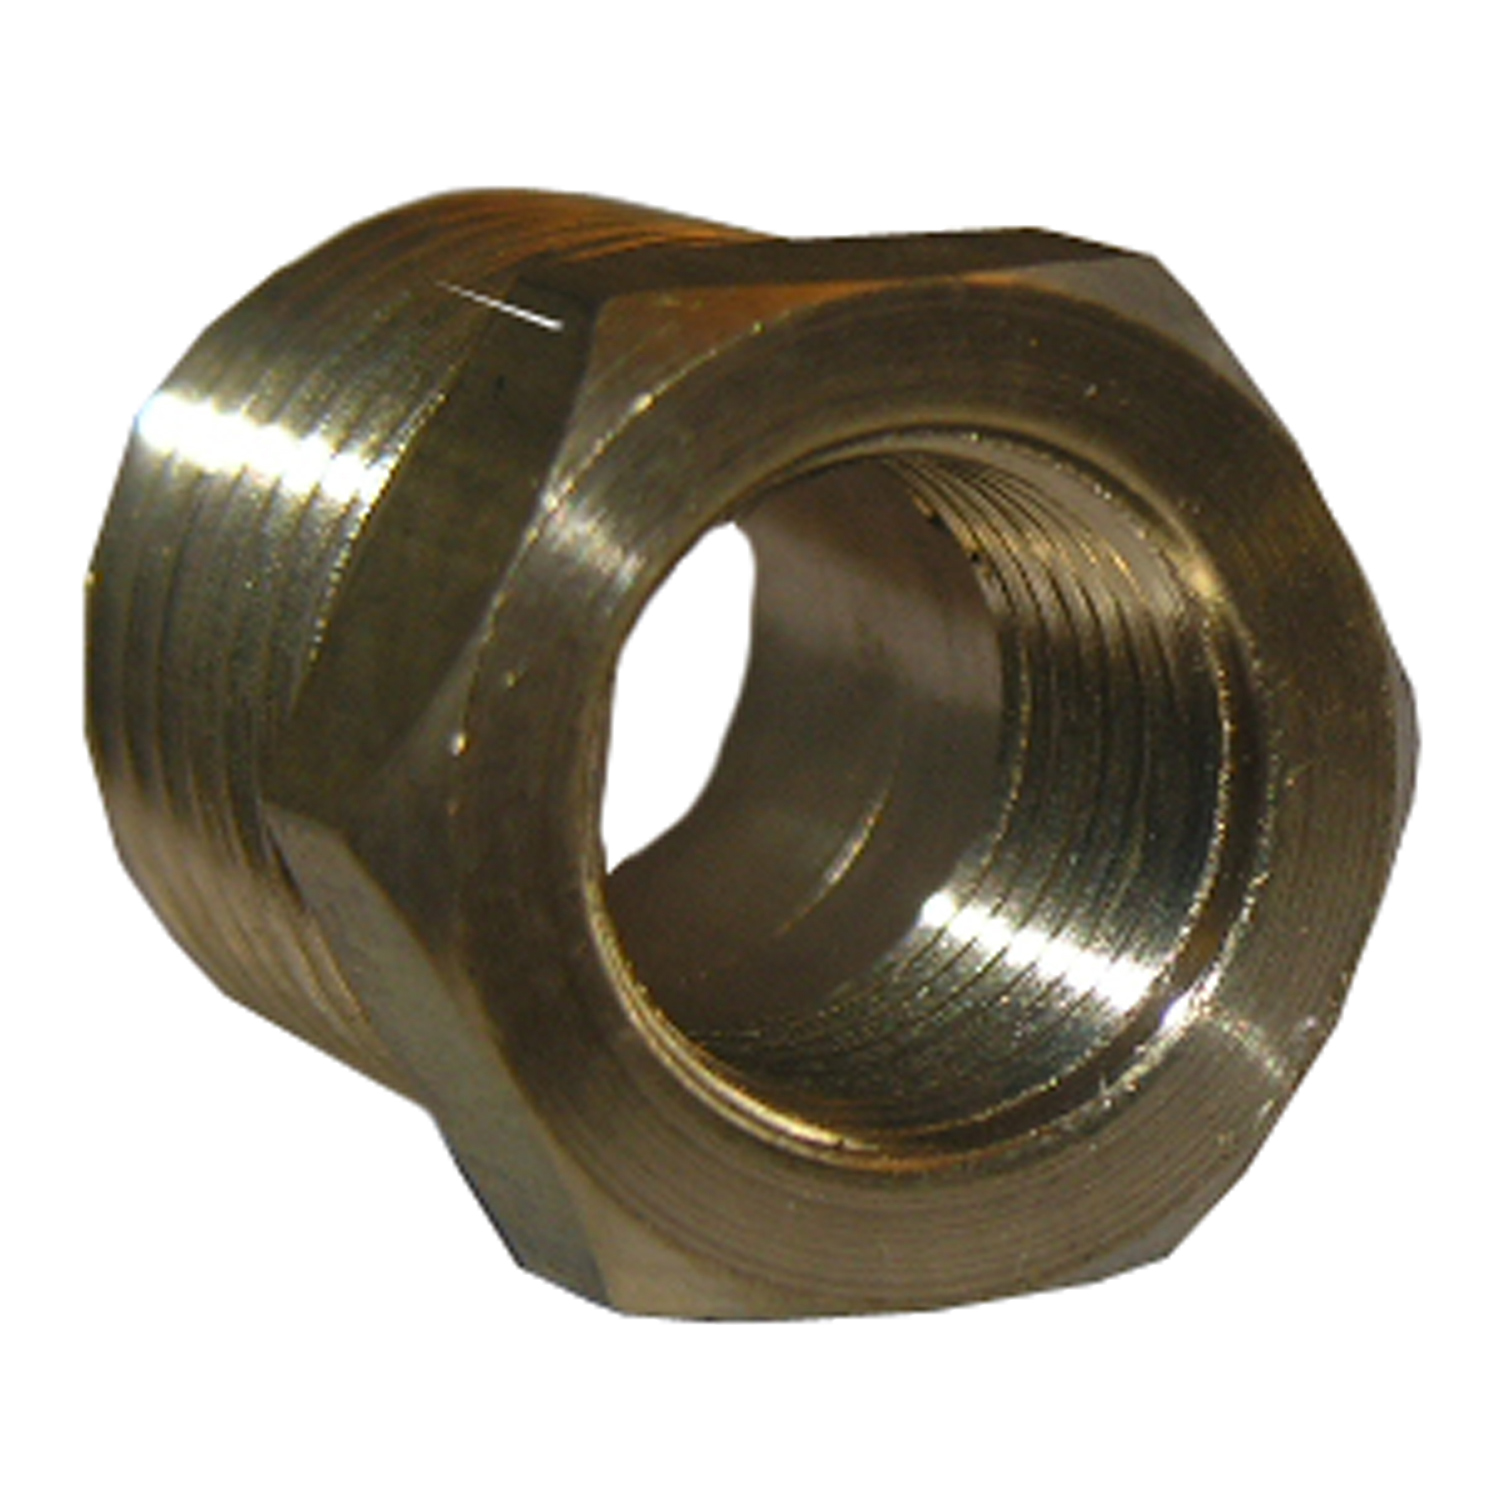 17-9243 Hex Pipe Bushing, 3/8 x 1/8 in, MPT x FPT, Brass, 125 psi Pressure